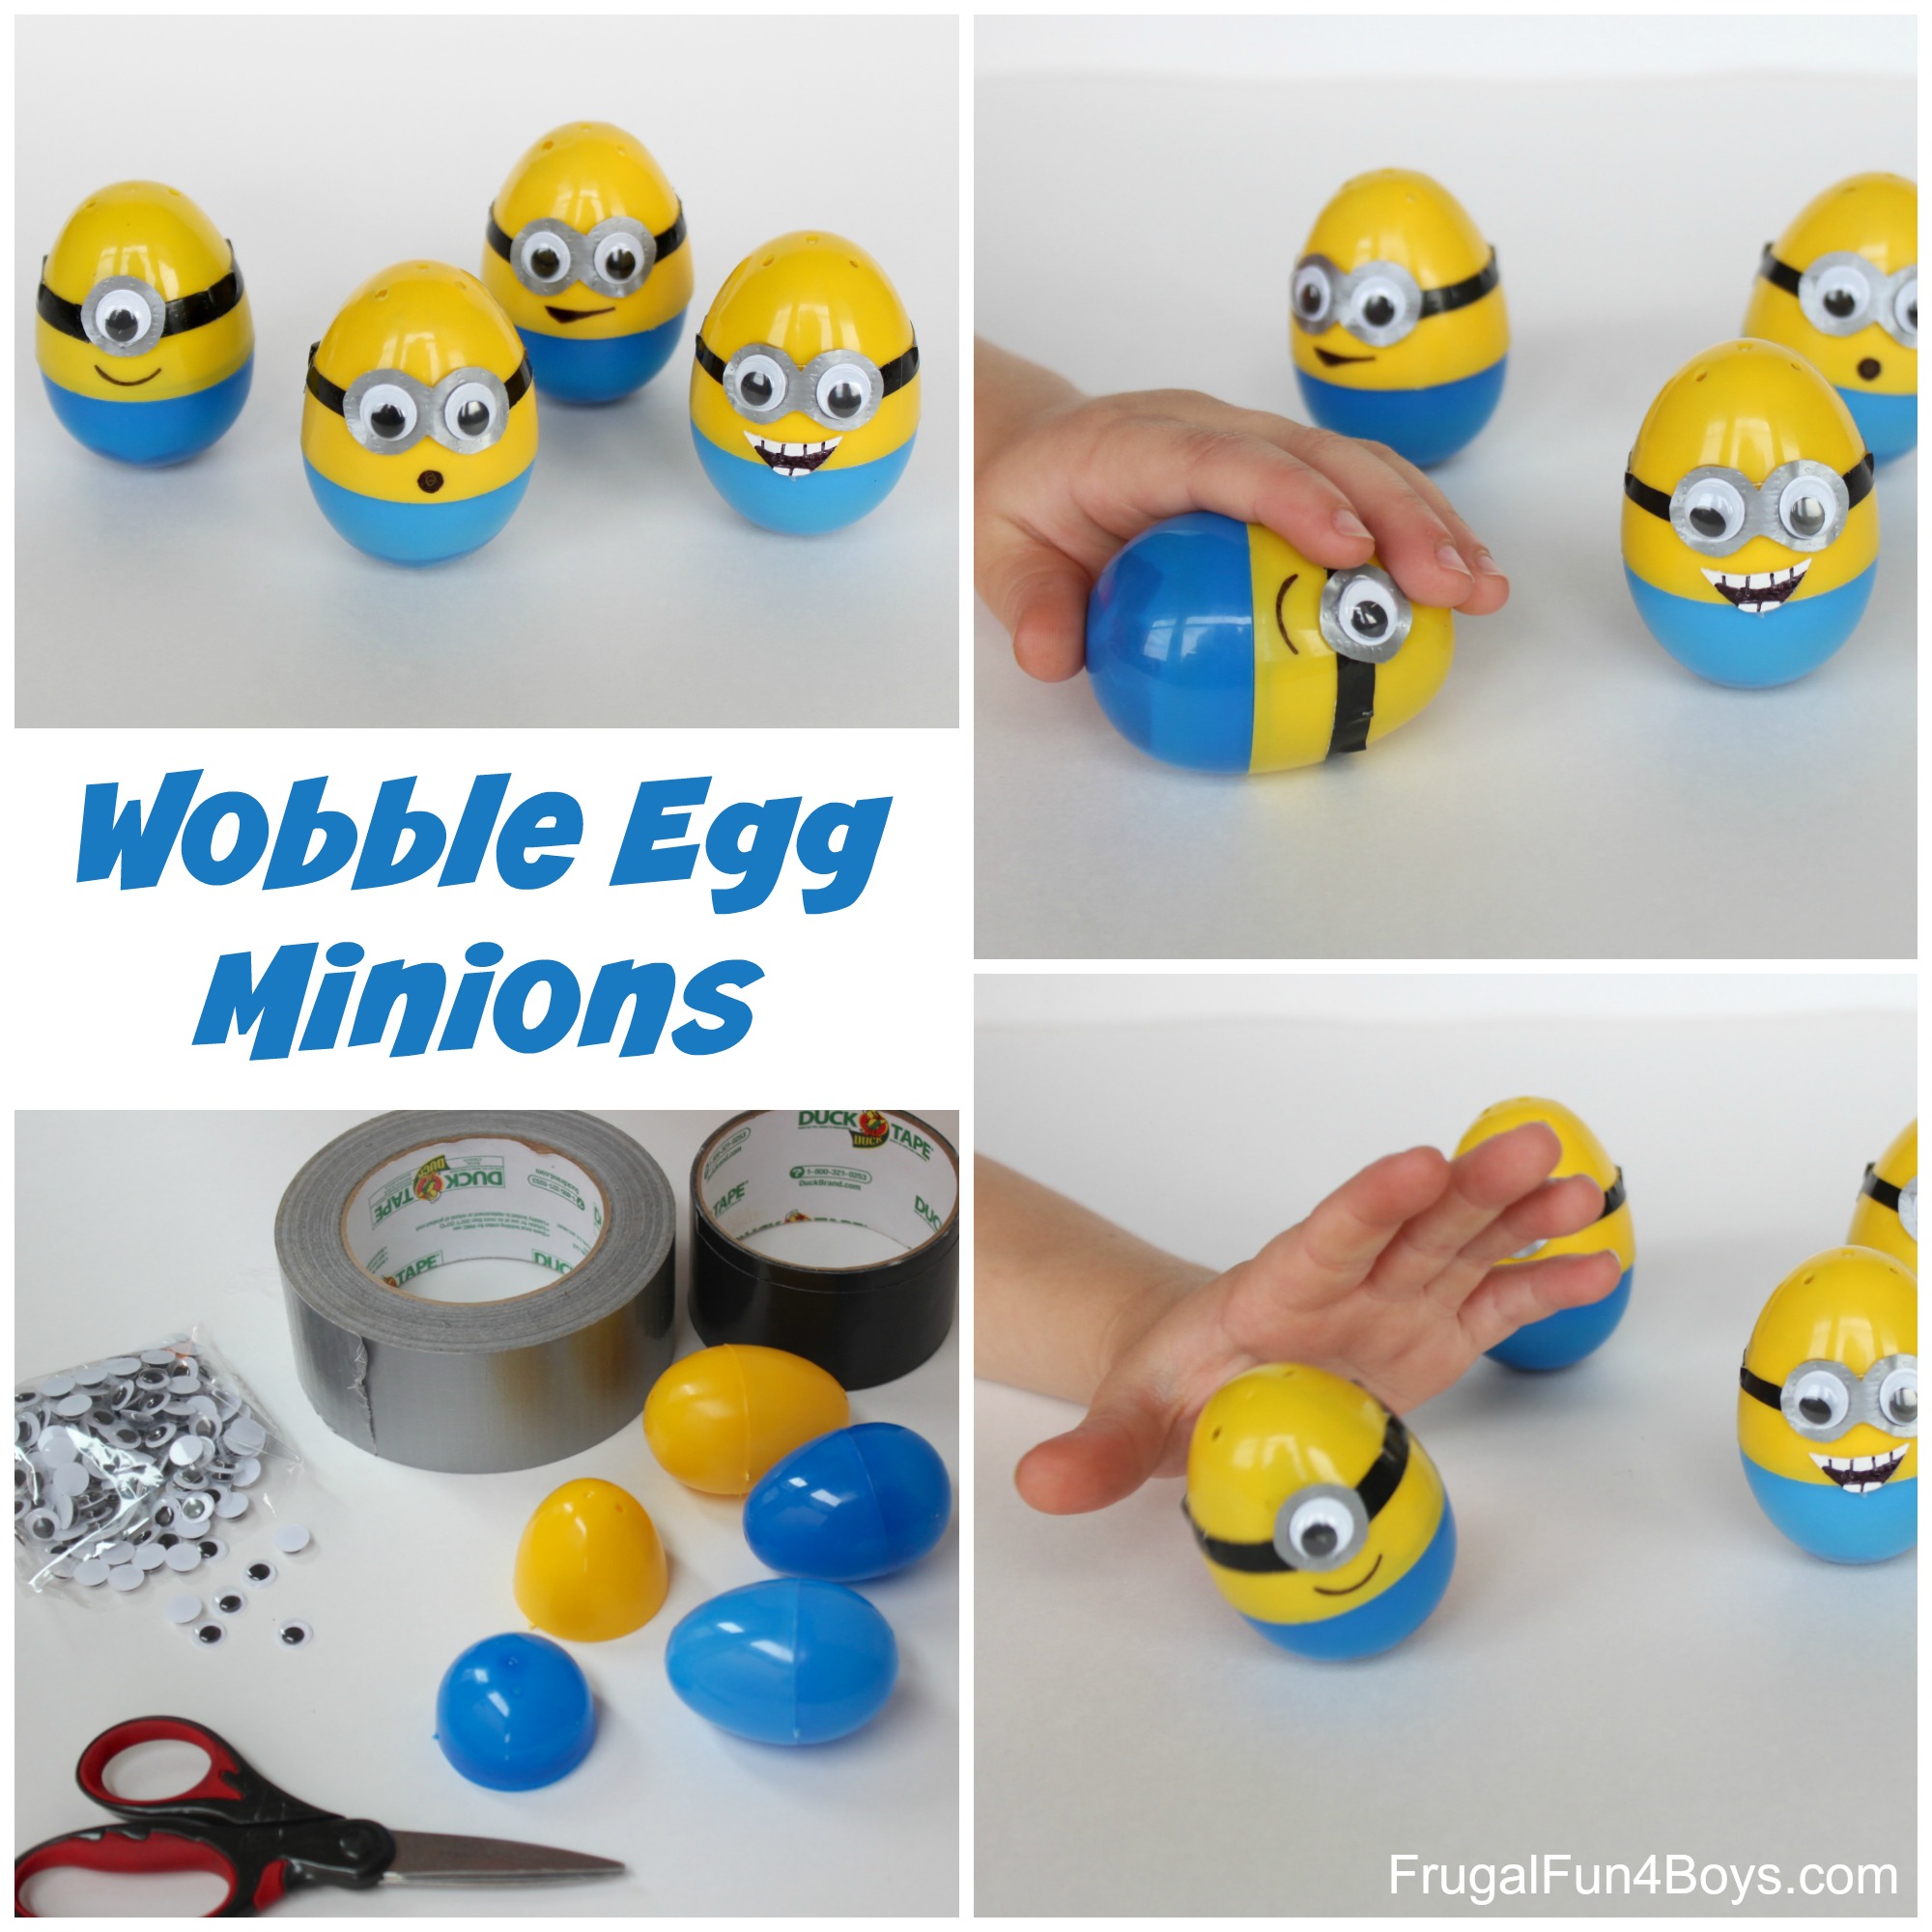 Minion Eggs - Push them down and they pop back up!